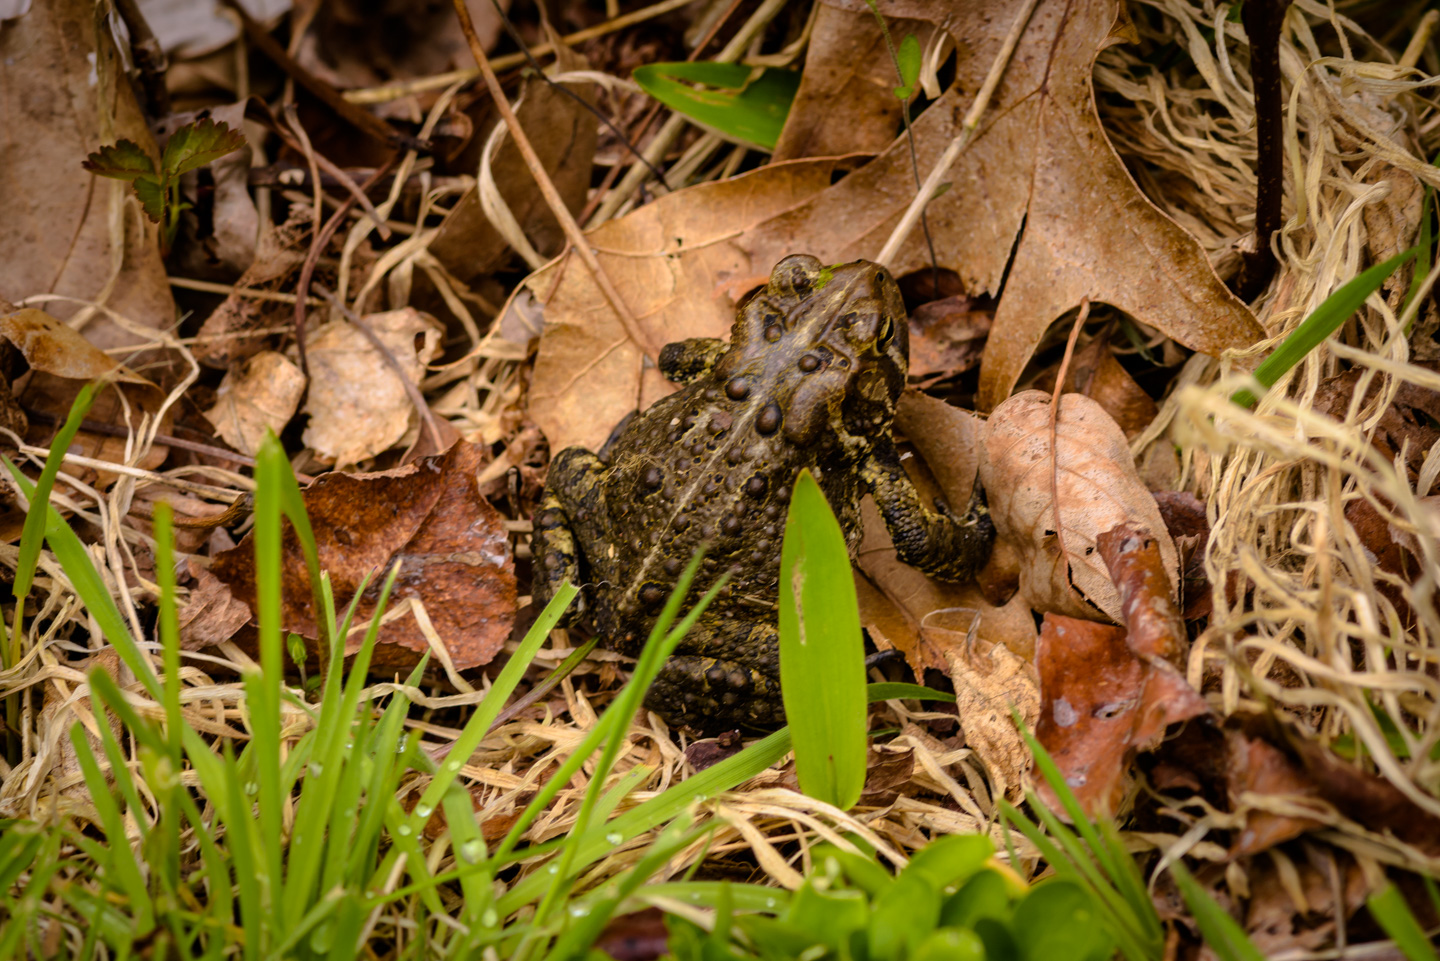 A toad nestled in the leaves